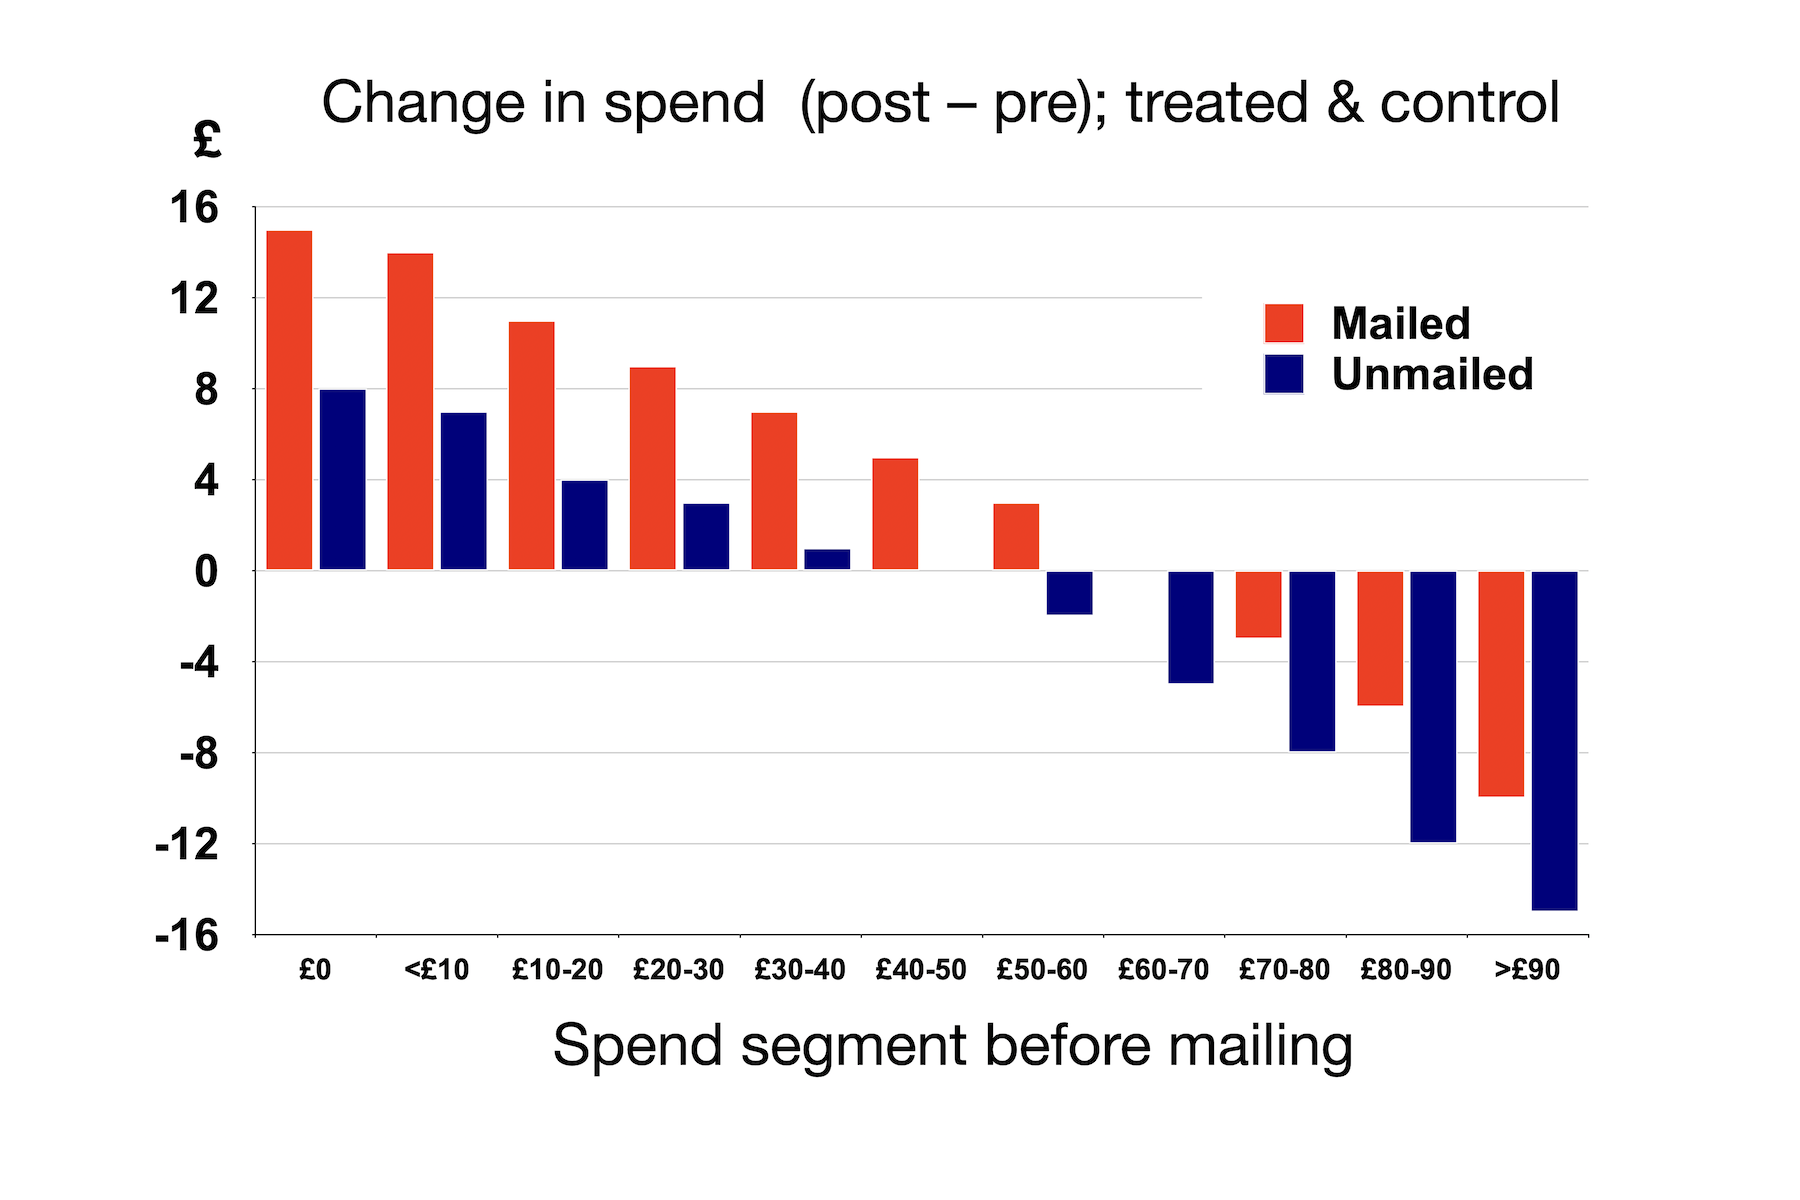 The same graph as above, but now showing the change in
          spend for the control group as well as for the treated group.
          The same general pattern is seen in the control group,
          but the increases are smaller in the control group
          (starting at £8 for the group that had spent £0 in the
          six weeks before the mailing, and going down to --£15
          for the group spending over £90 in the pre-period.
          So change in spend is more positive, or less negative,
          in the treated group than in the control group in every
          behavioural segment.